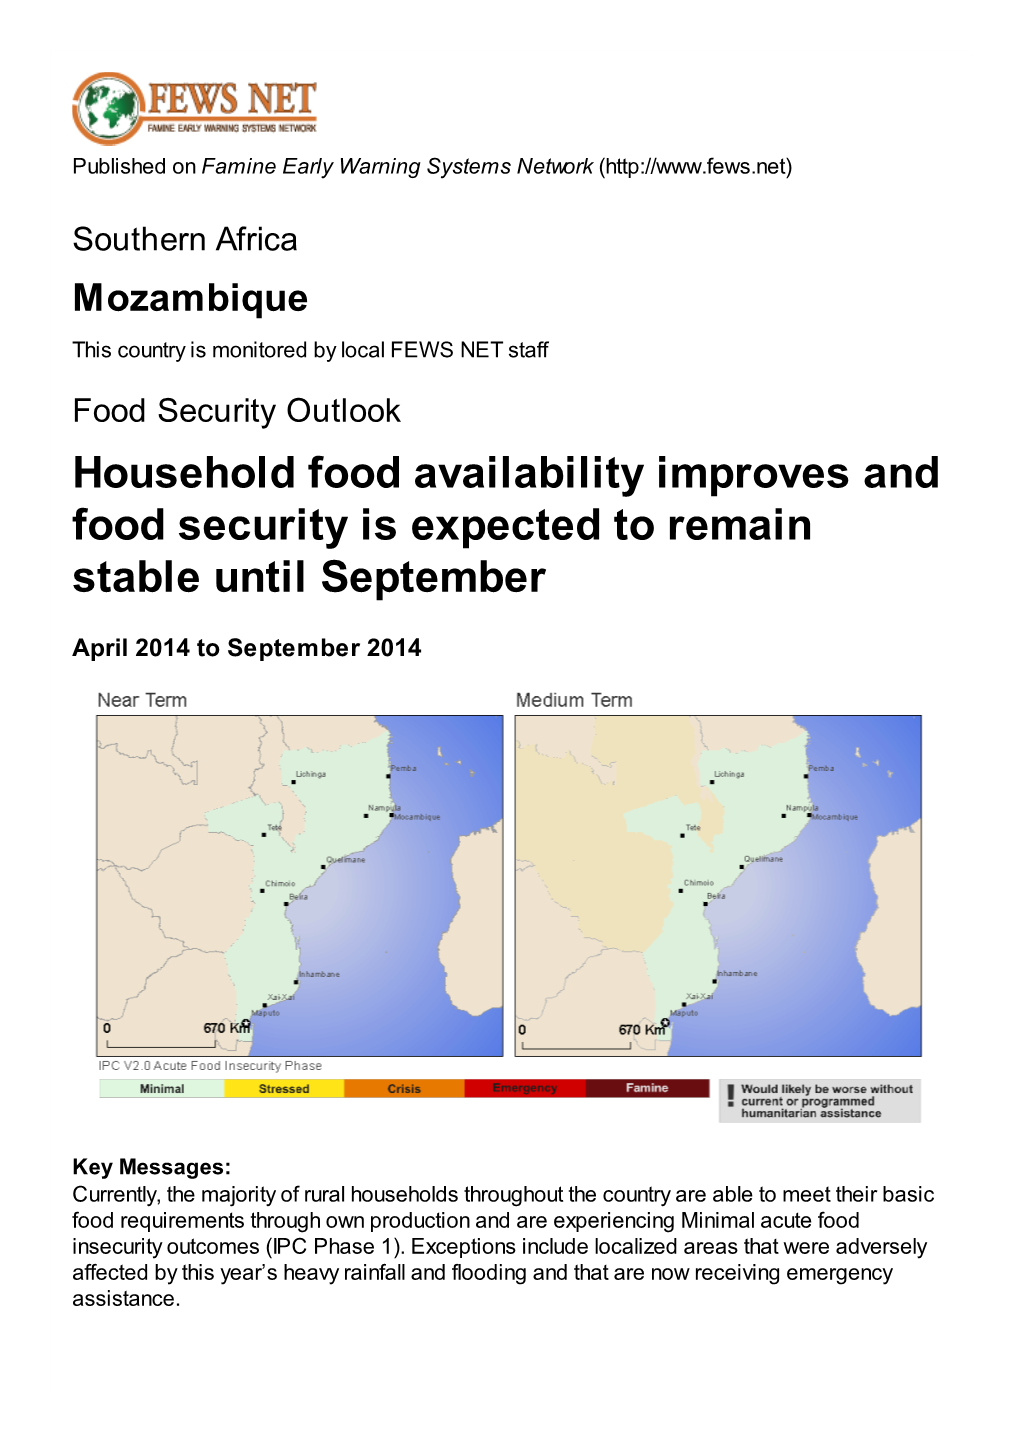 Household Food Availability Improves and Food Security Is Expected to Remain Stable Until September